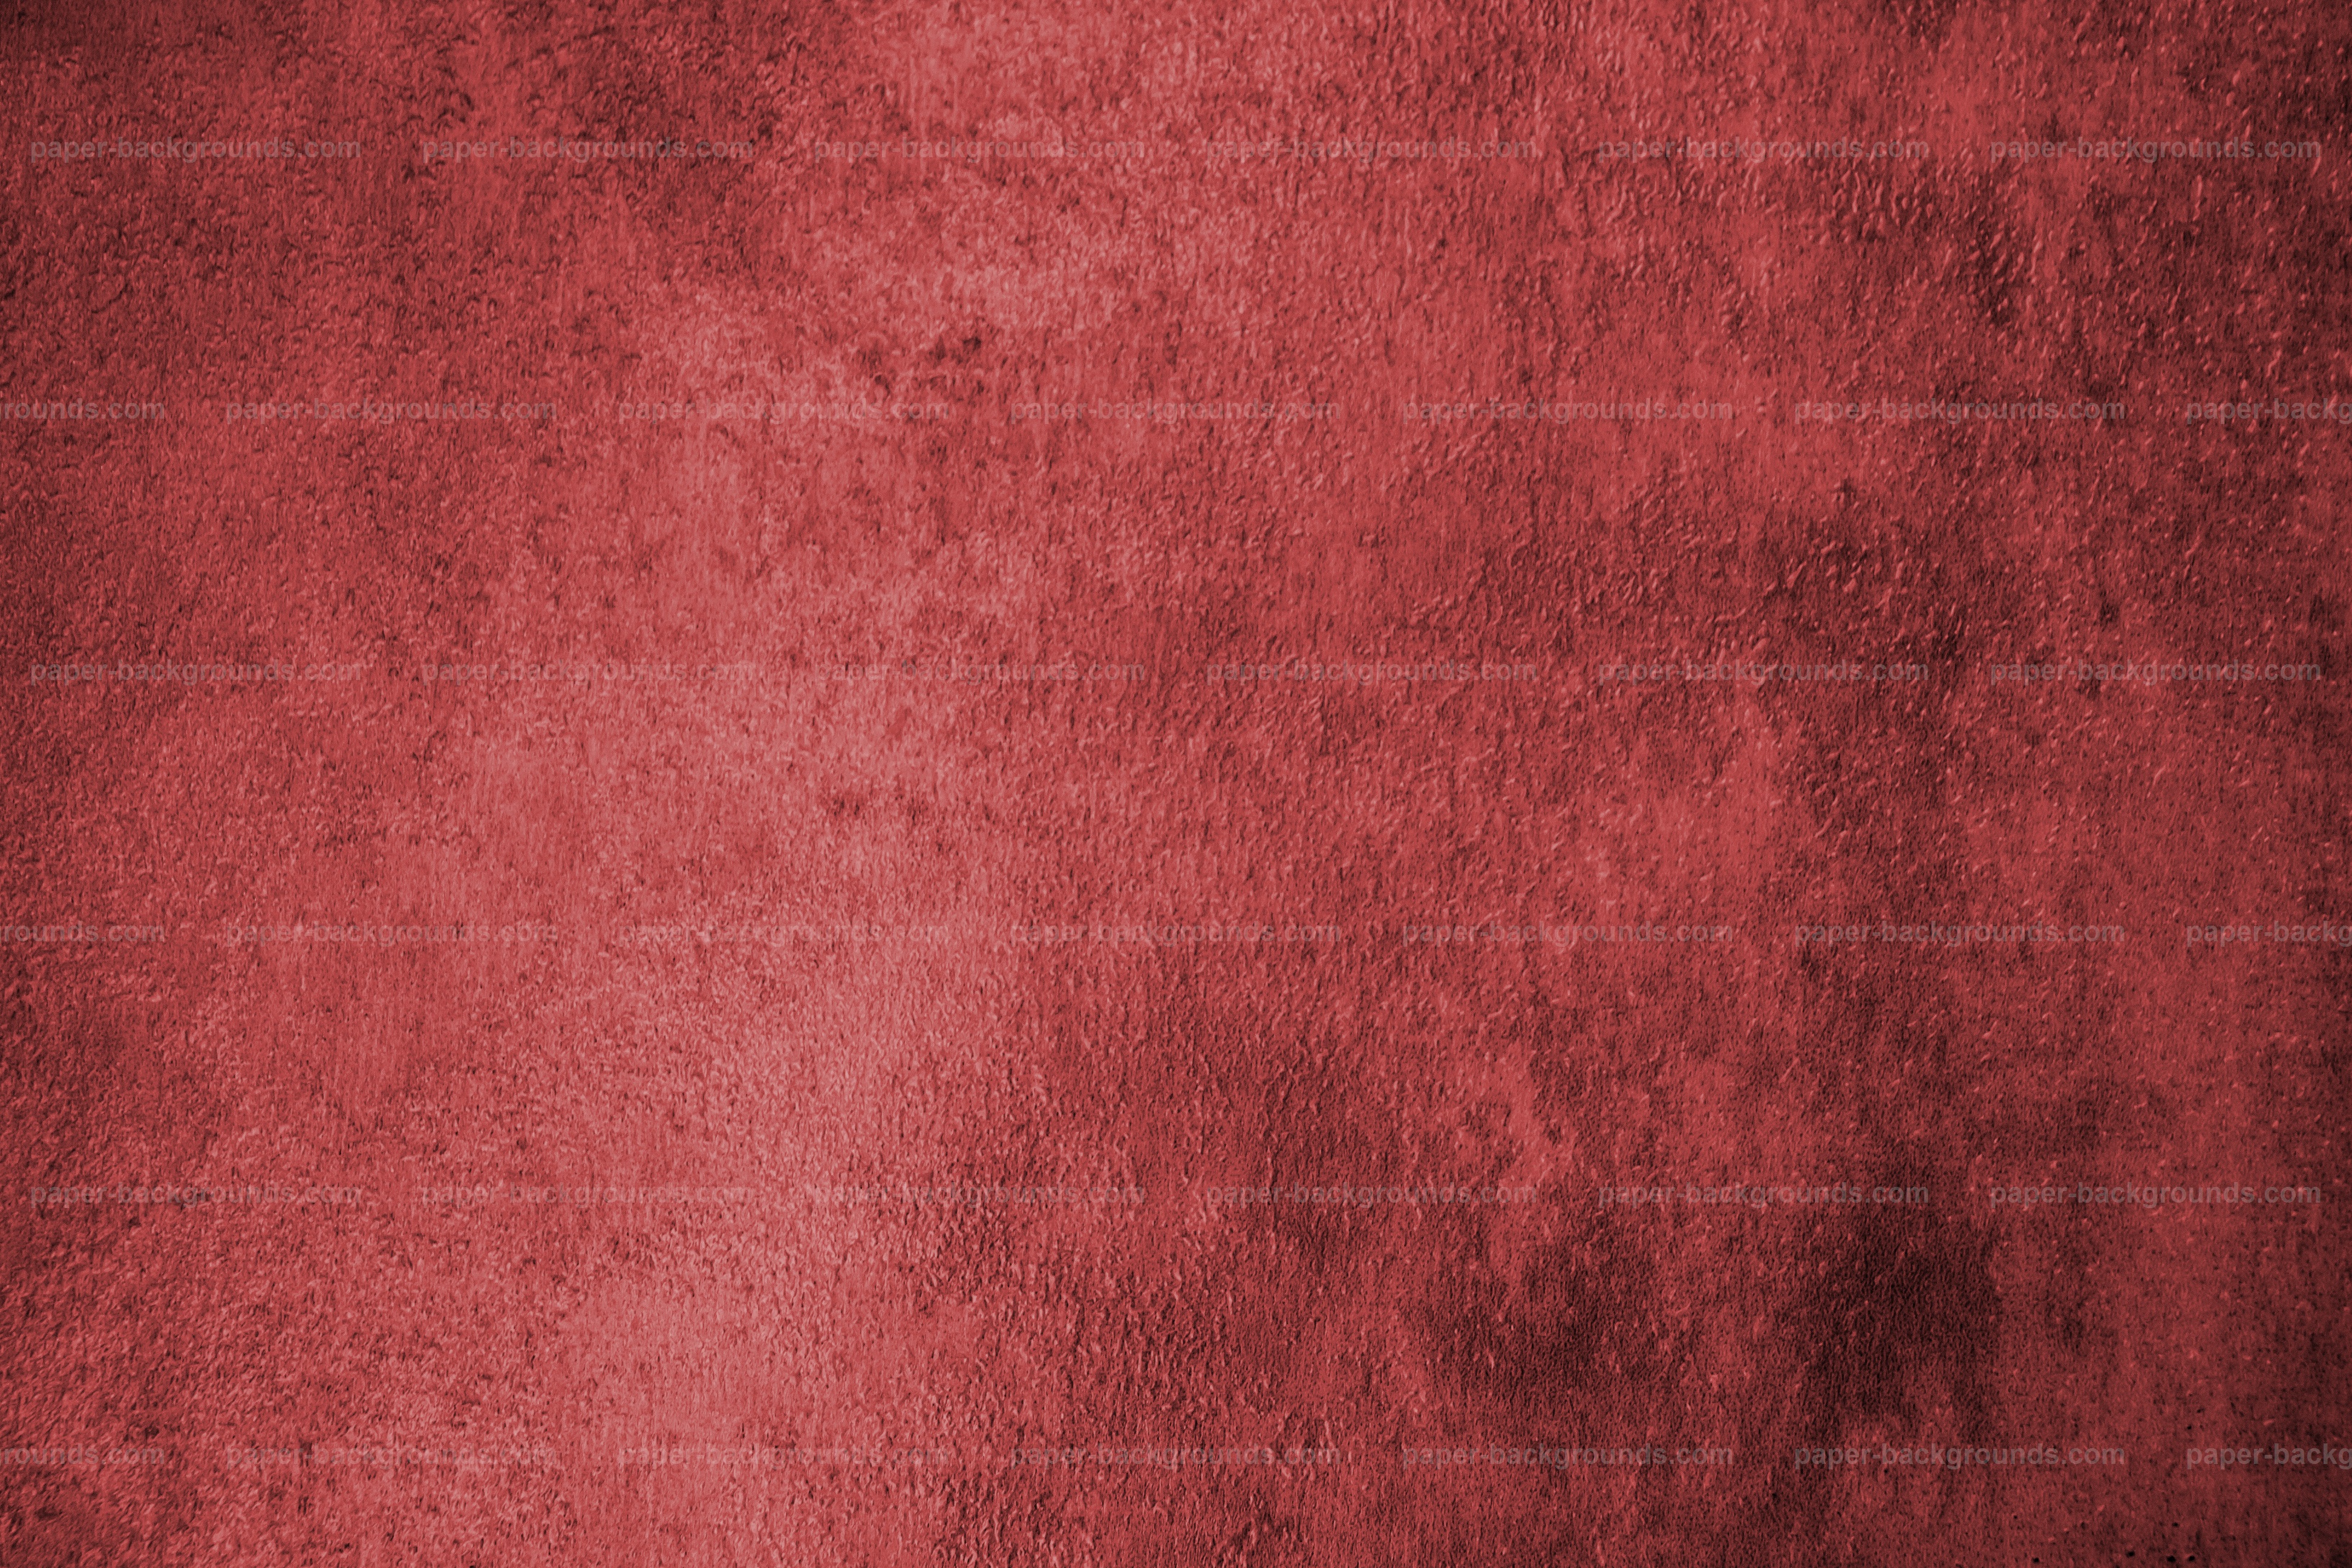 Red Grunge Background Image Gallery